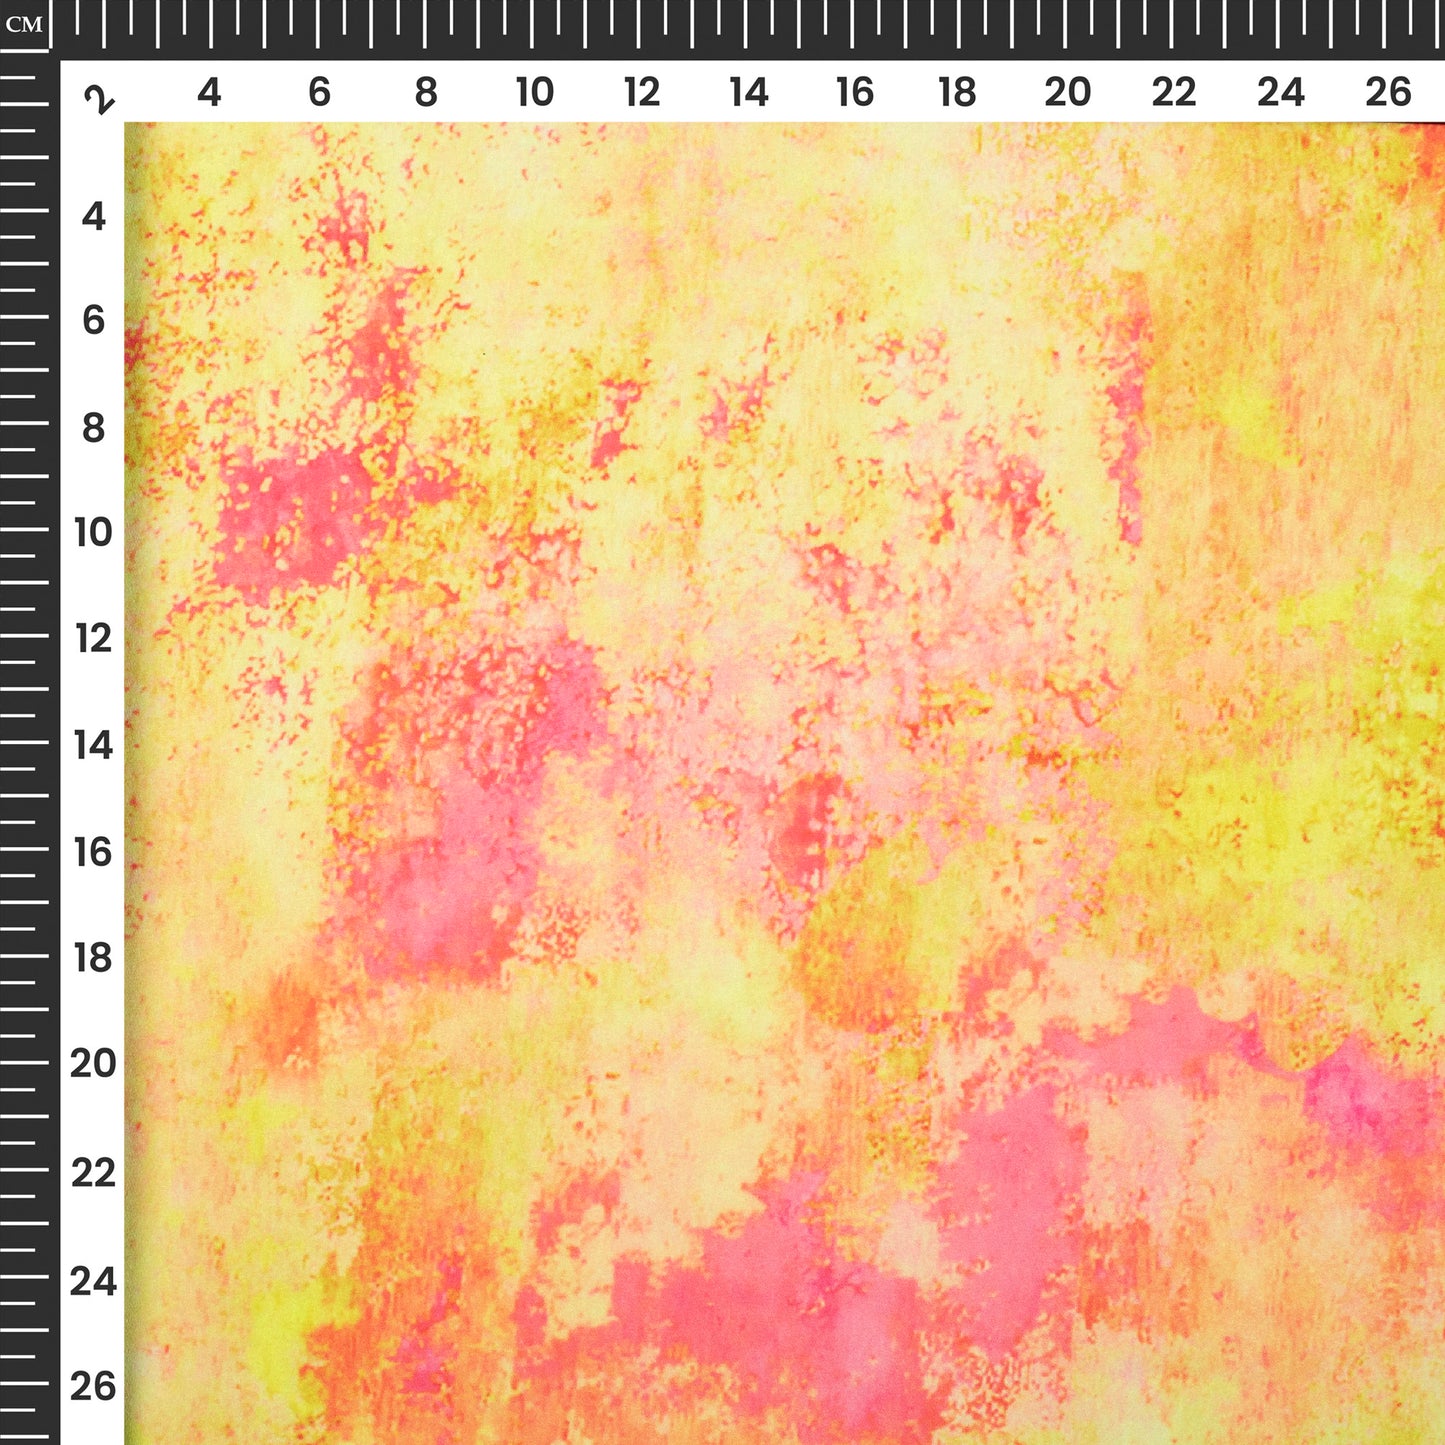 Beautiful Tie And Dye Digital Print Moss Georgette Fabric(Width 56 Inches)